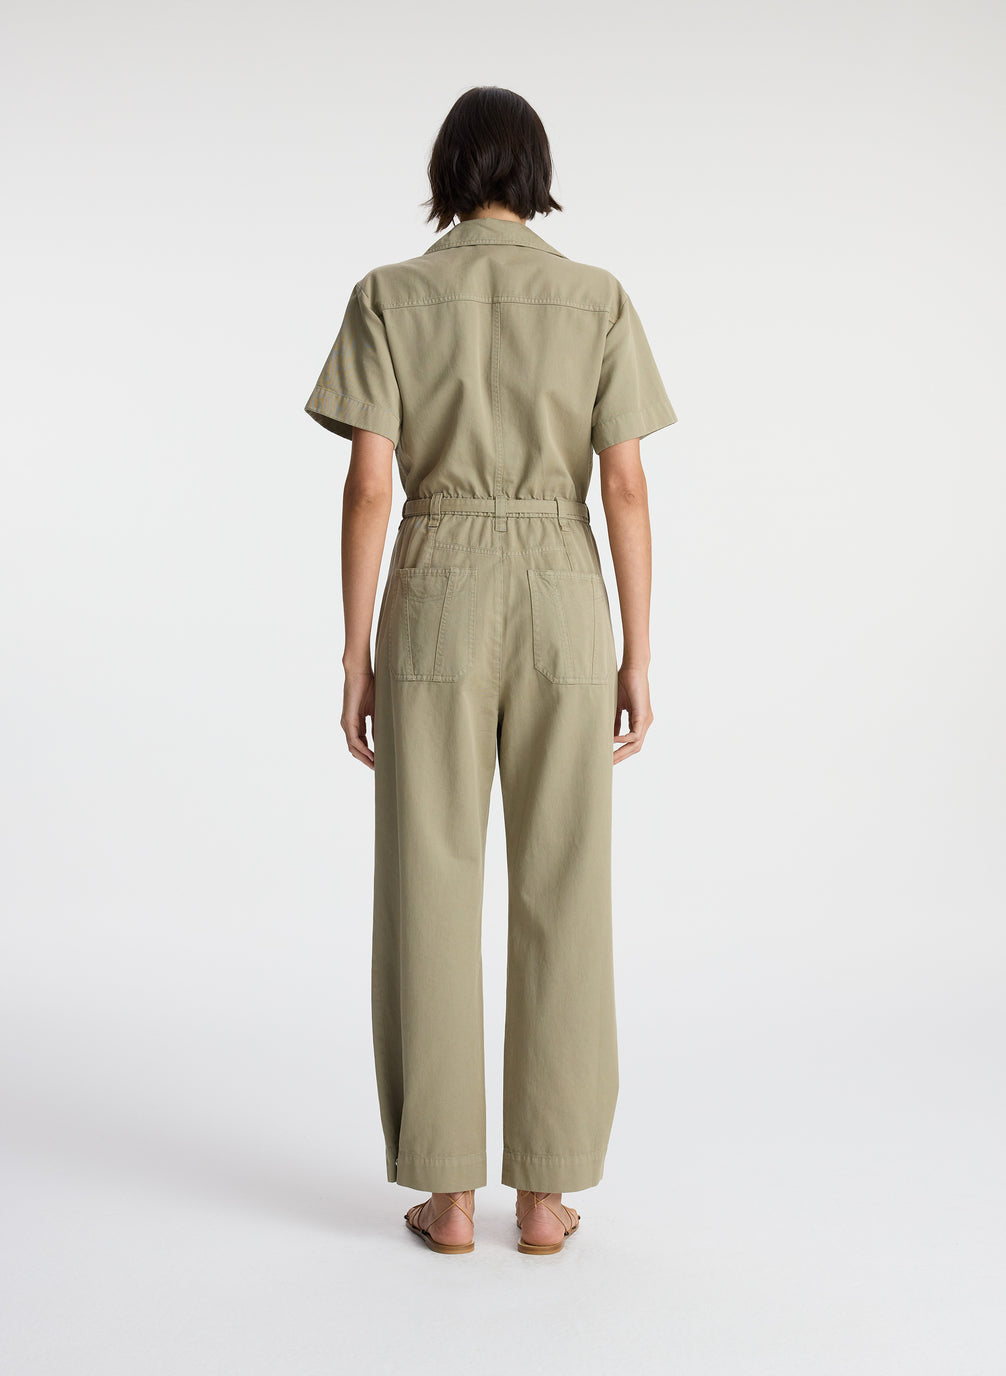 back view of woman in short sleeve khaki jumpsuit